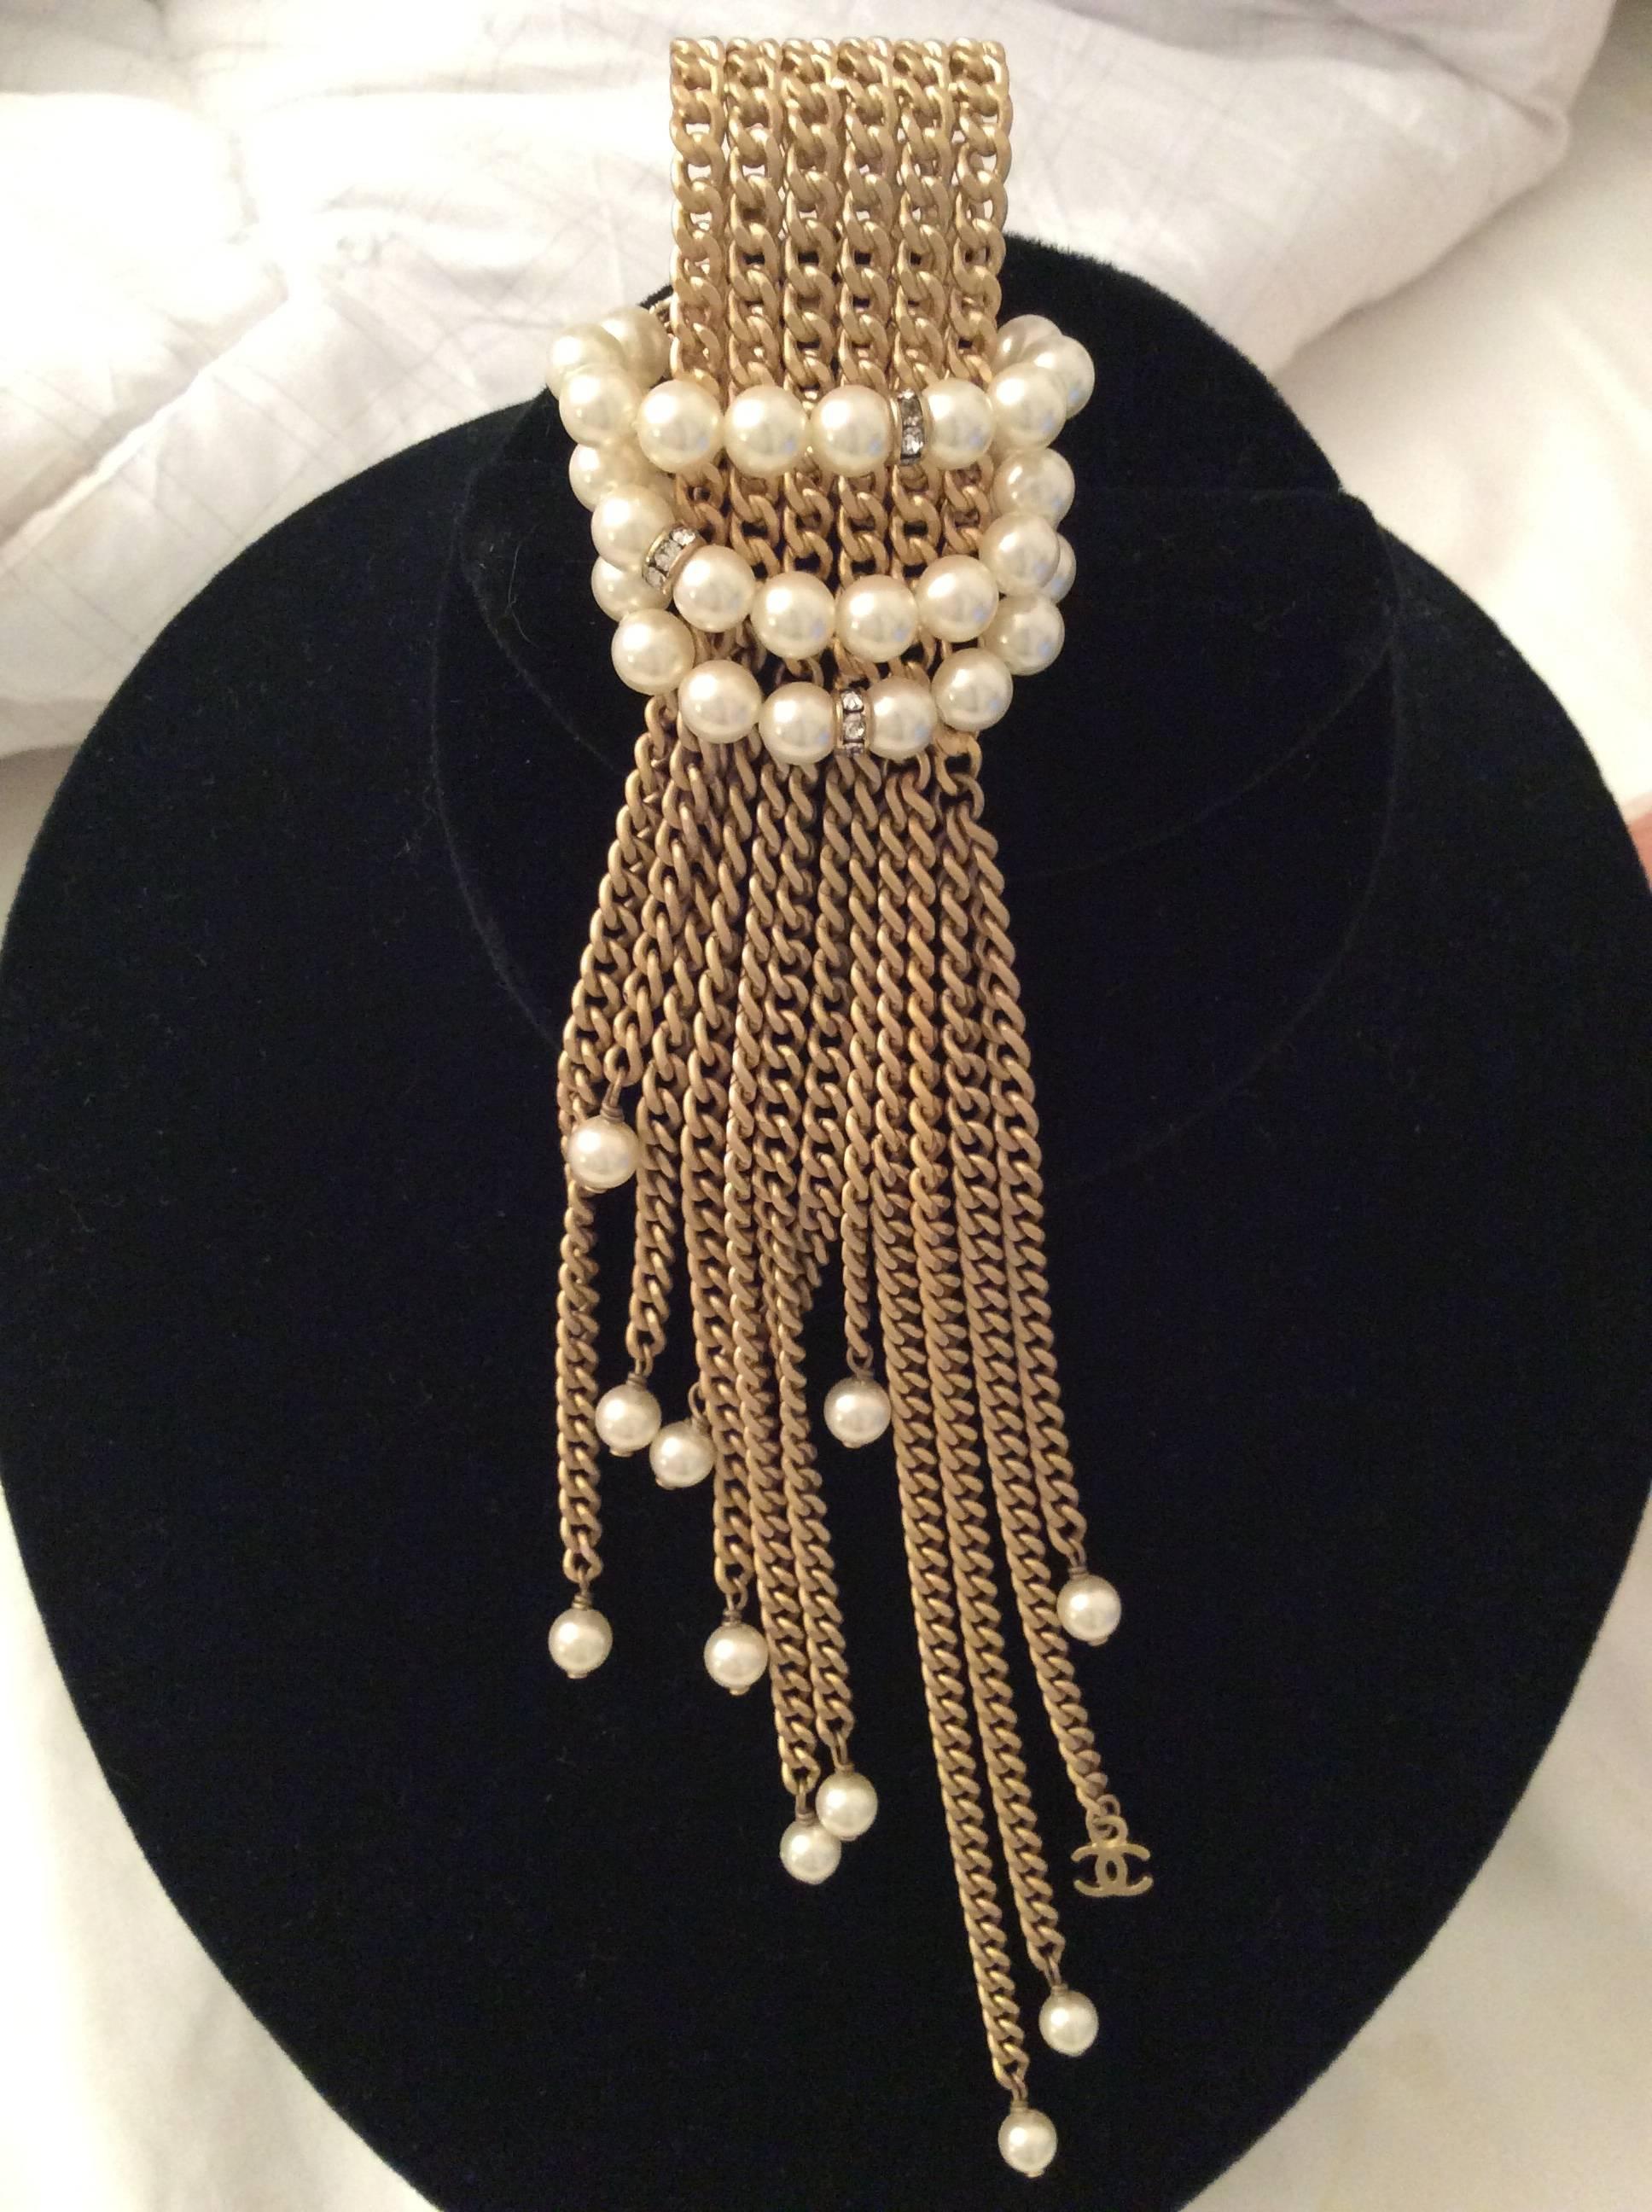 Women's Chanel Pearl, Rhinestone, and Gold Tone Chain Brooch - 1970's For Sale